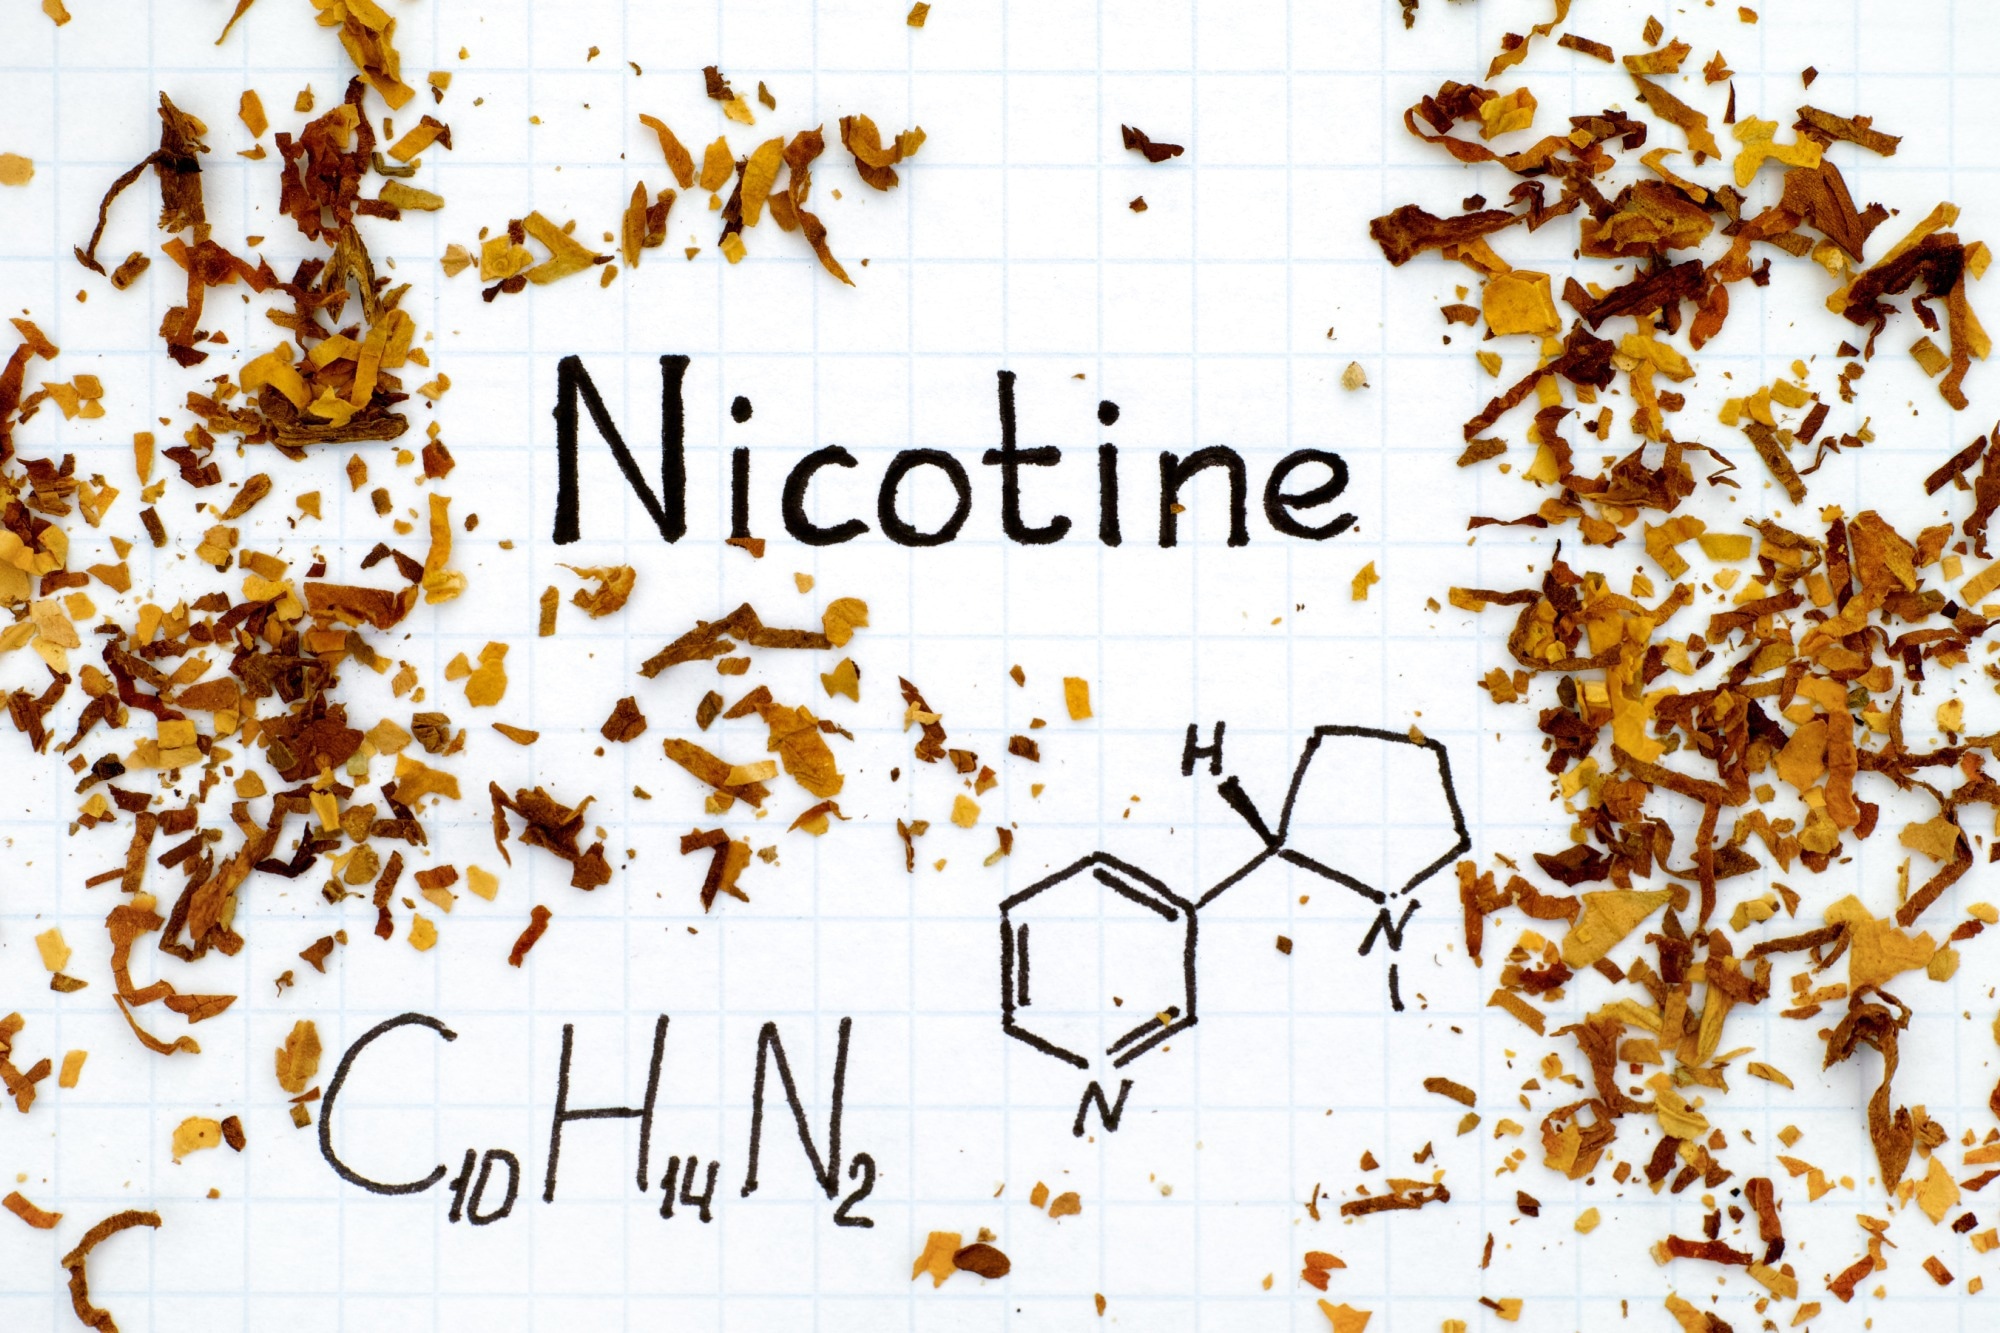 Study: Nicotine has no significant cytoprotective activity against SARS-CoV-2 infection. Image Credit: Ekaterina_Minaeva/Shutterstock